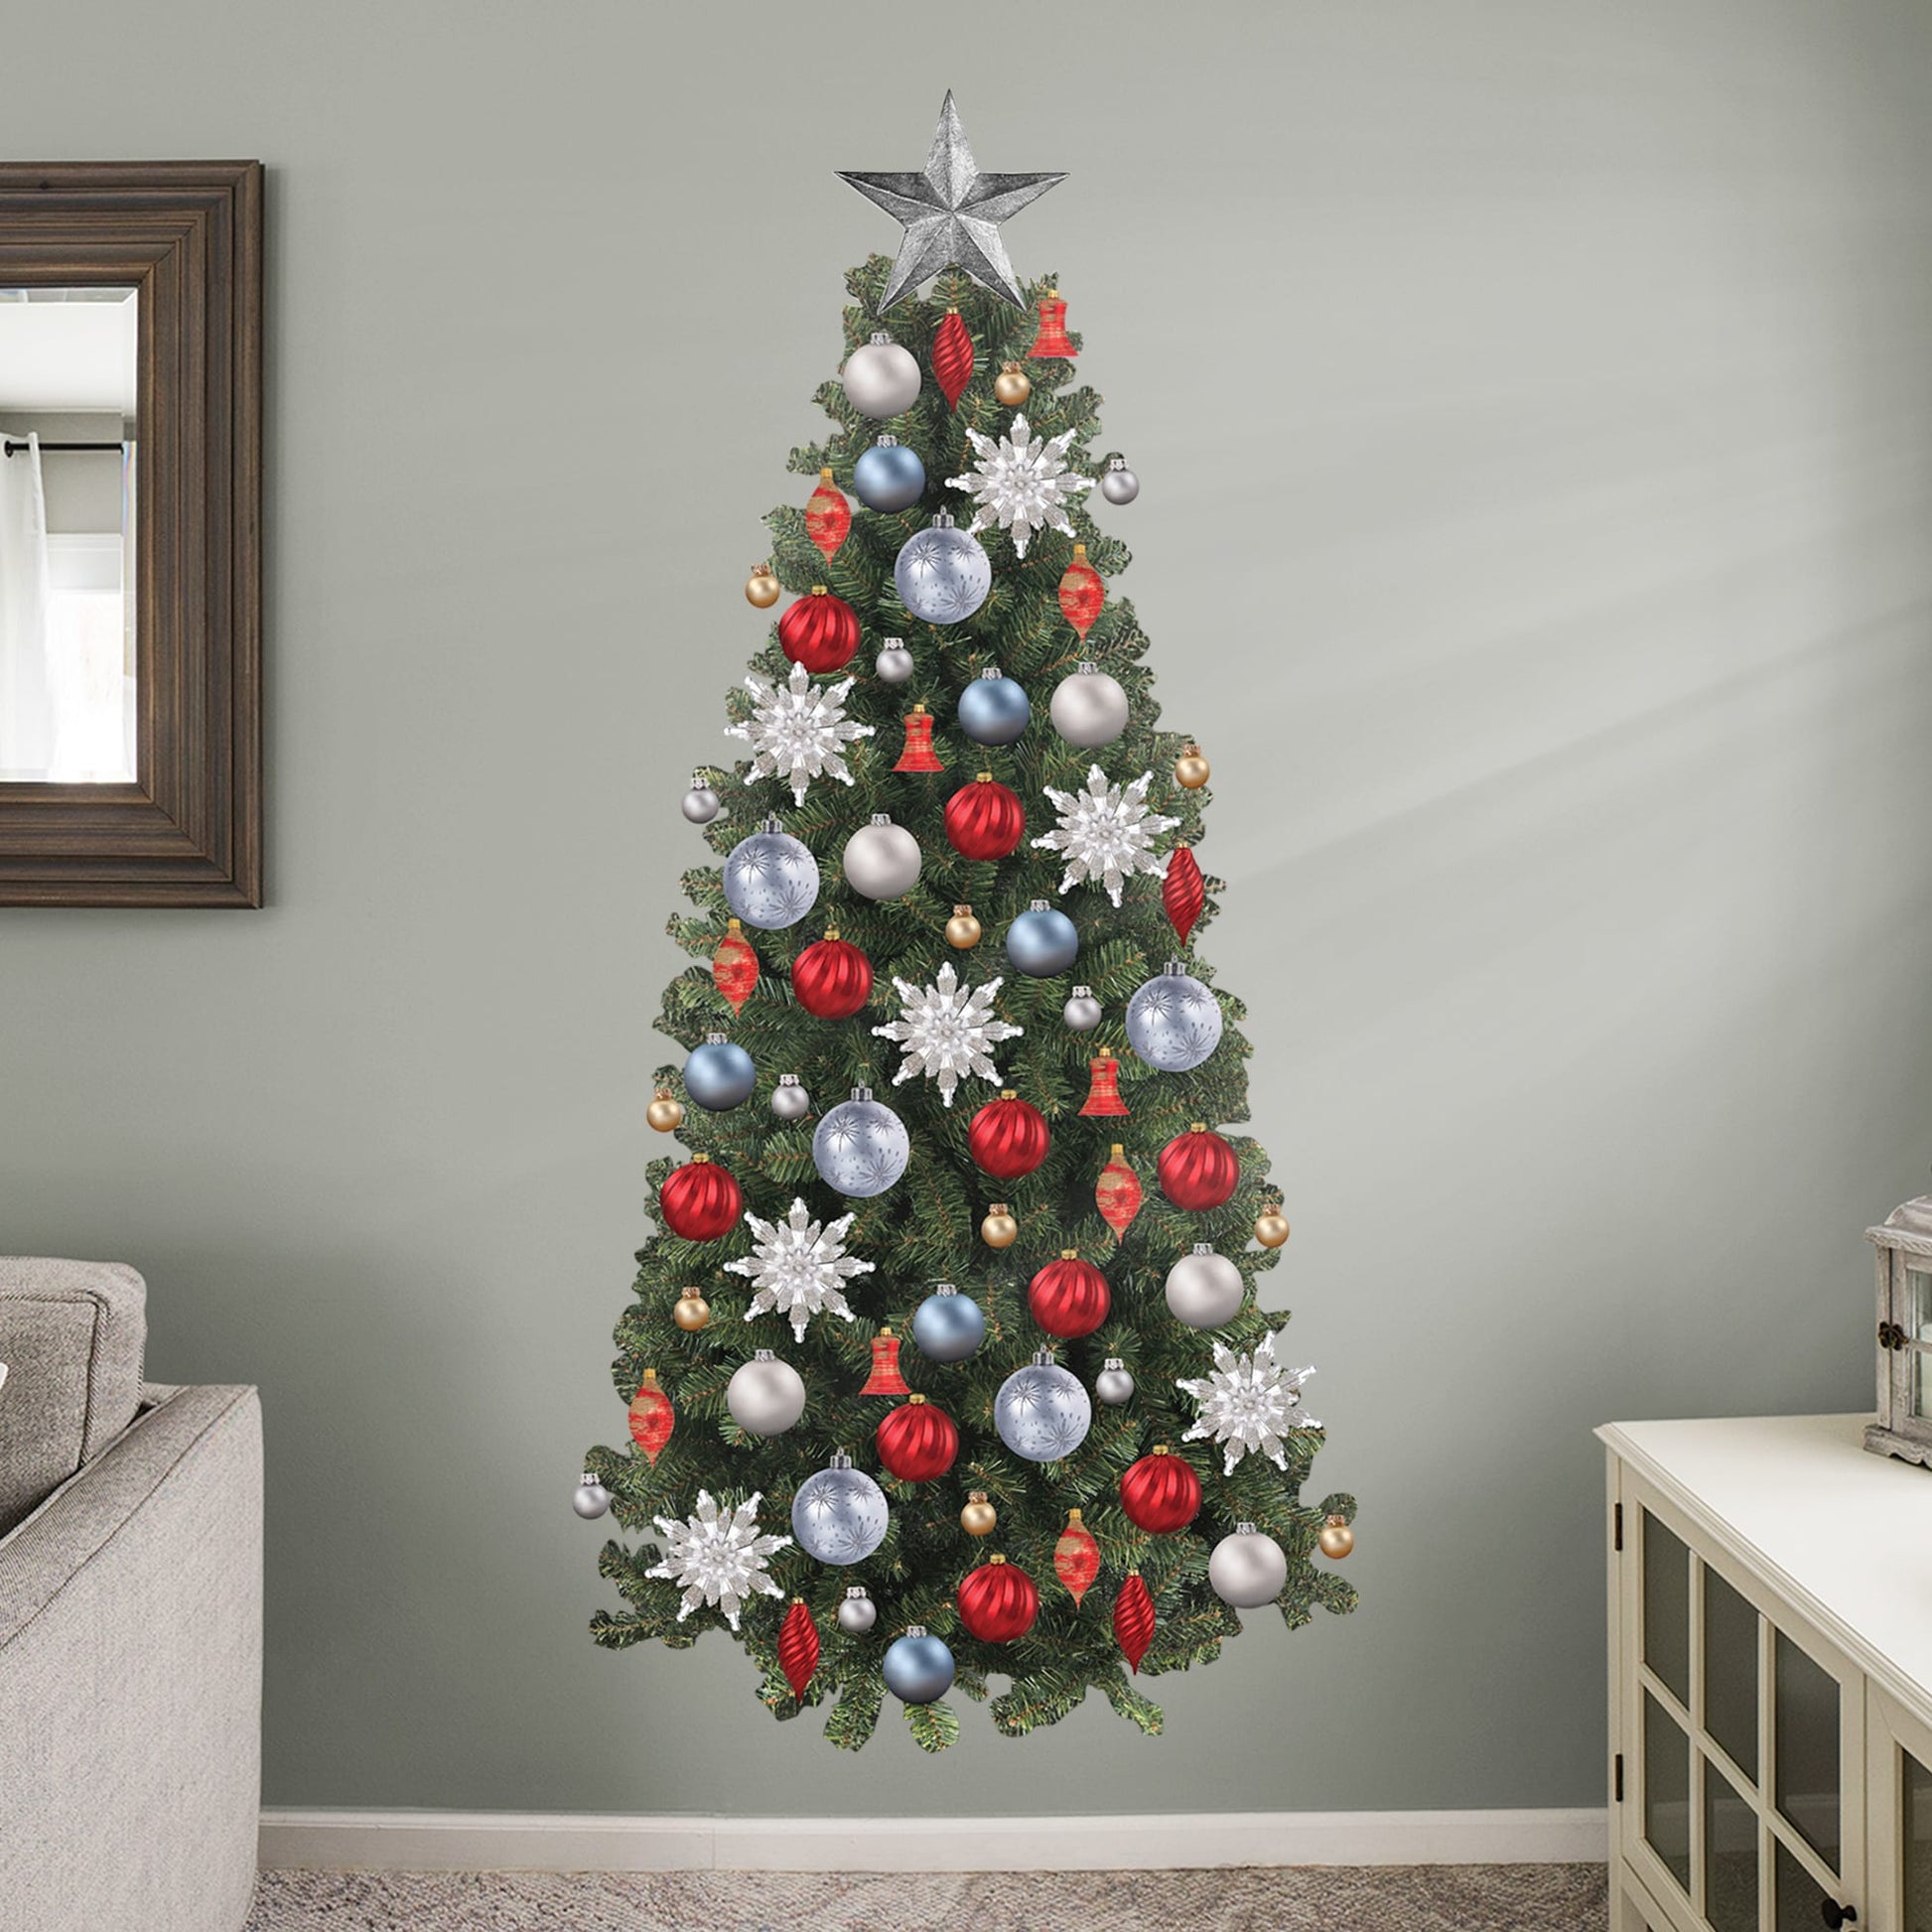 Christmas Tree Stickers, Christmas Tree and Merry Christmas Gifts Wall  Decals, PVC Wall Clings Window Decoration 